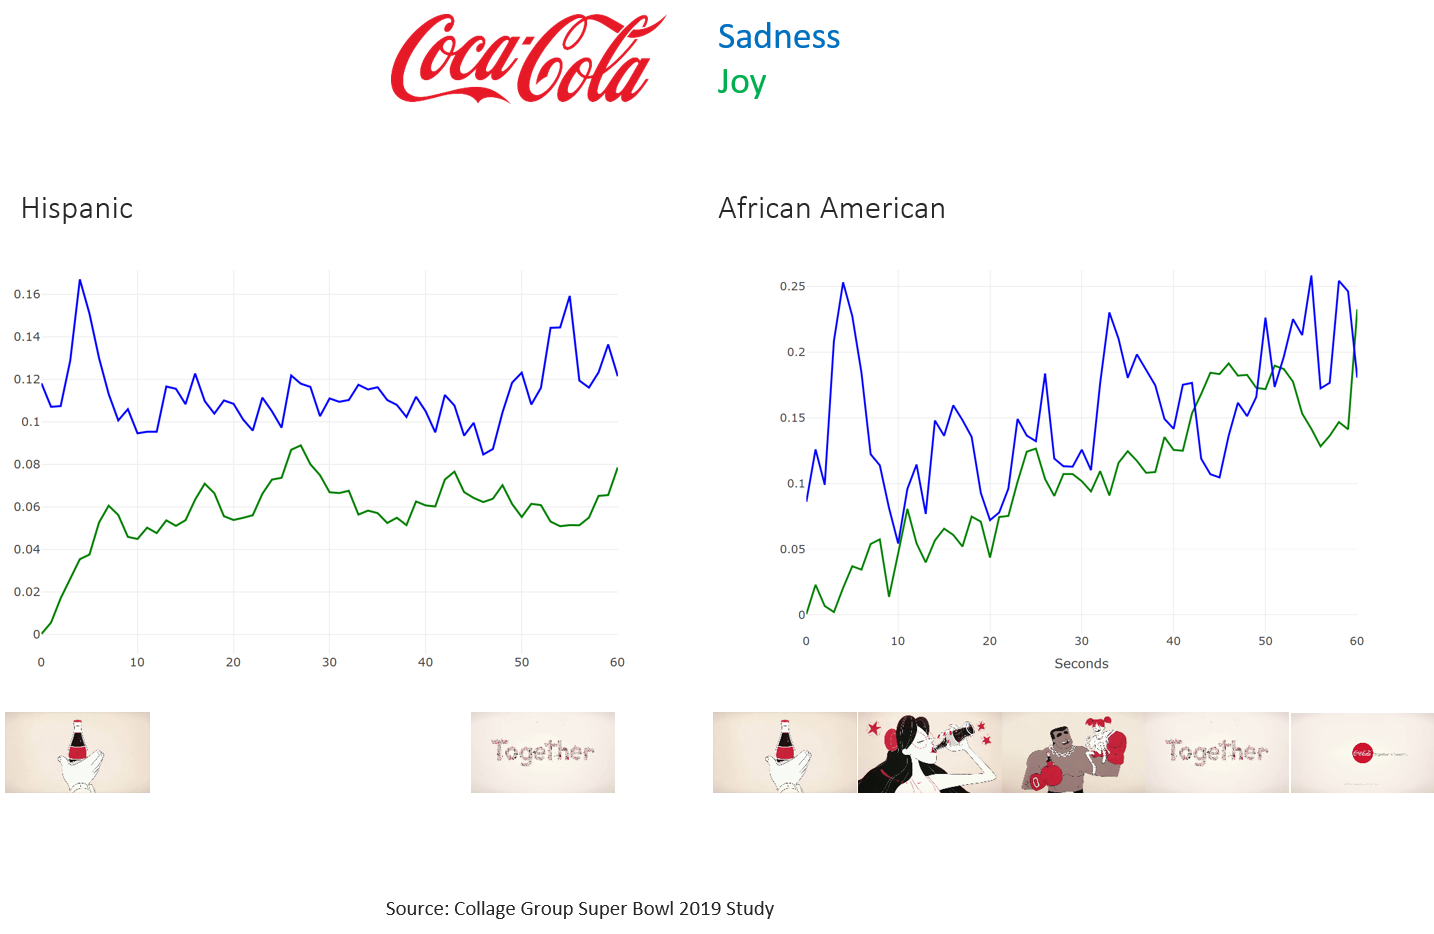 Coca Cola popularity with Hispanic and African Americans